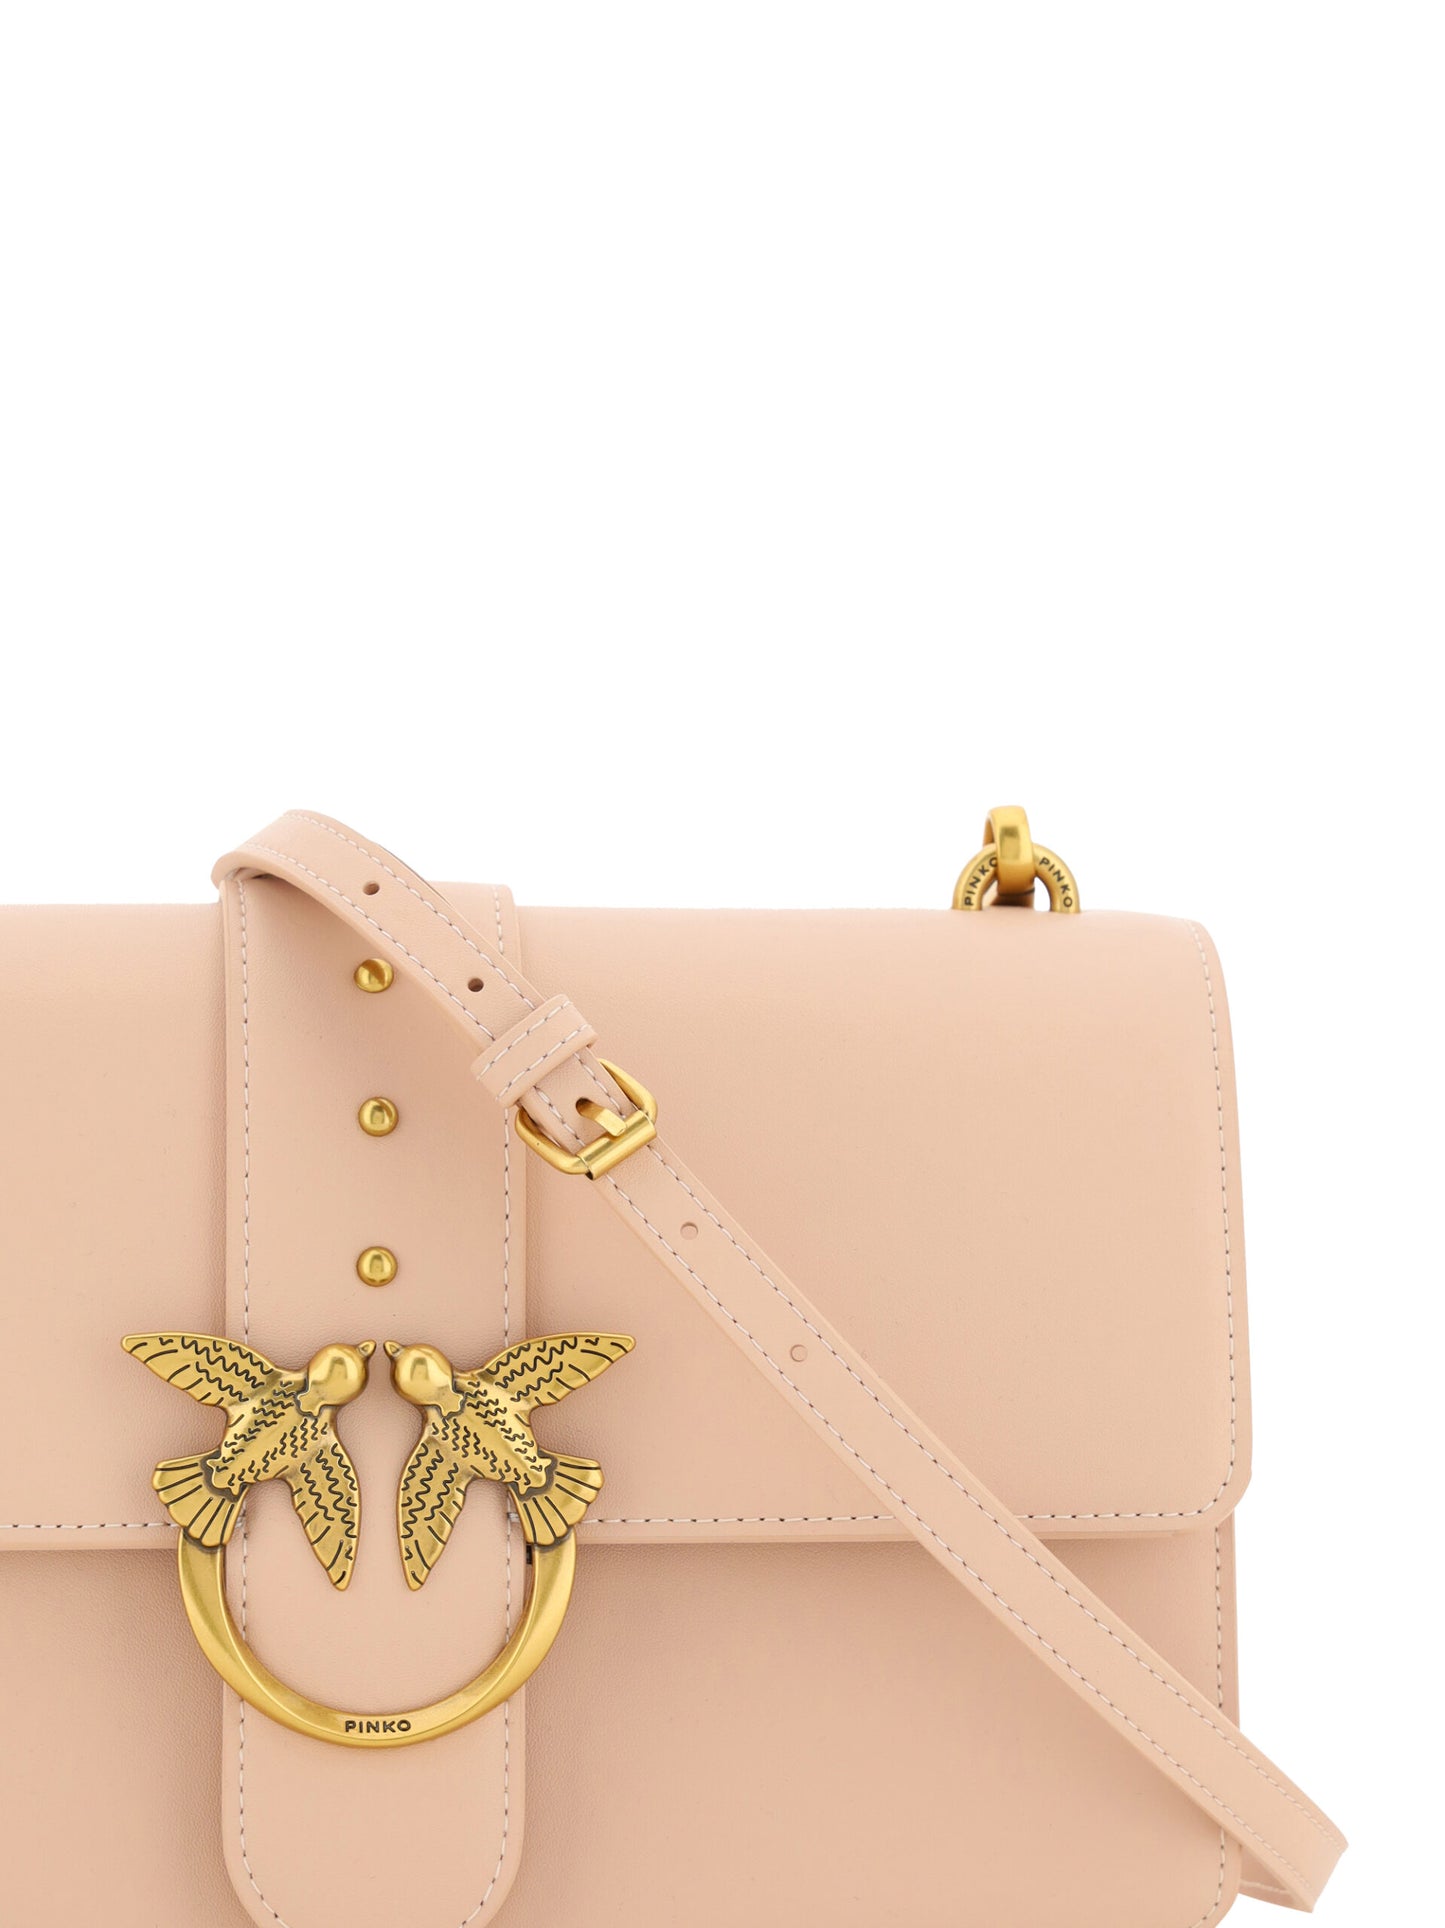 PINKO Pink Calf Leather Love One Classic Shoulder Bag